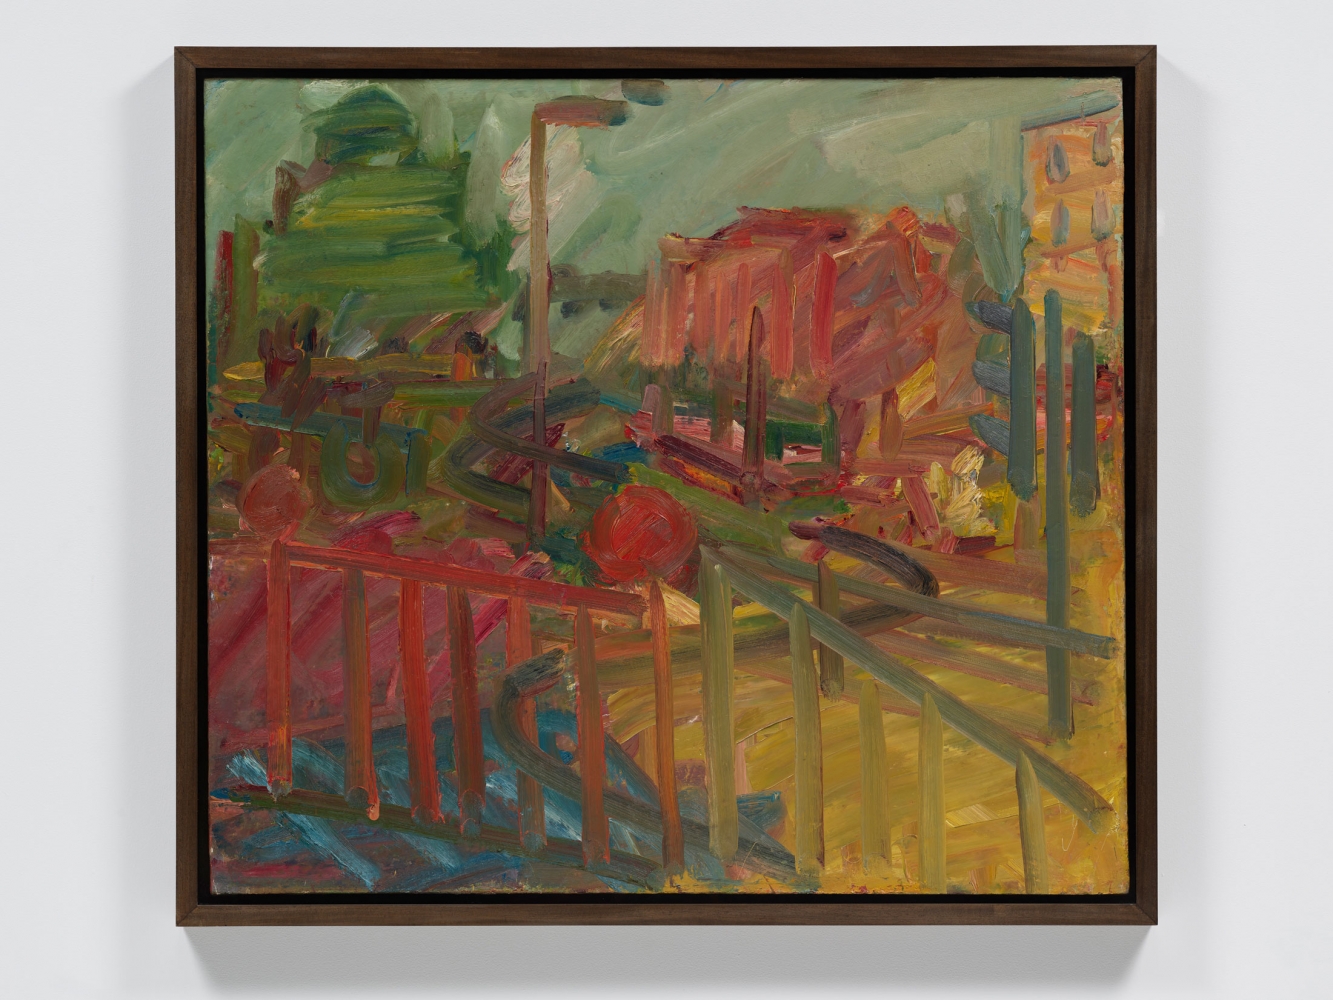 Frank Auerbach
The Last of &amp;#39;Koko&amp;#39;, 2007-8
Oil on canvas
48 1/8 x 54 1/8 inches
(122.2 x 137.5 cm)
Private Collection